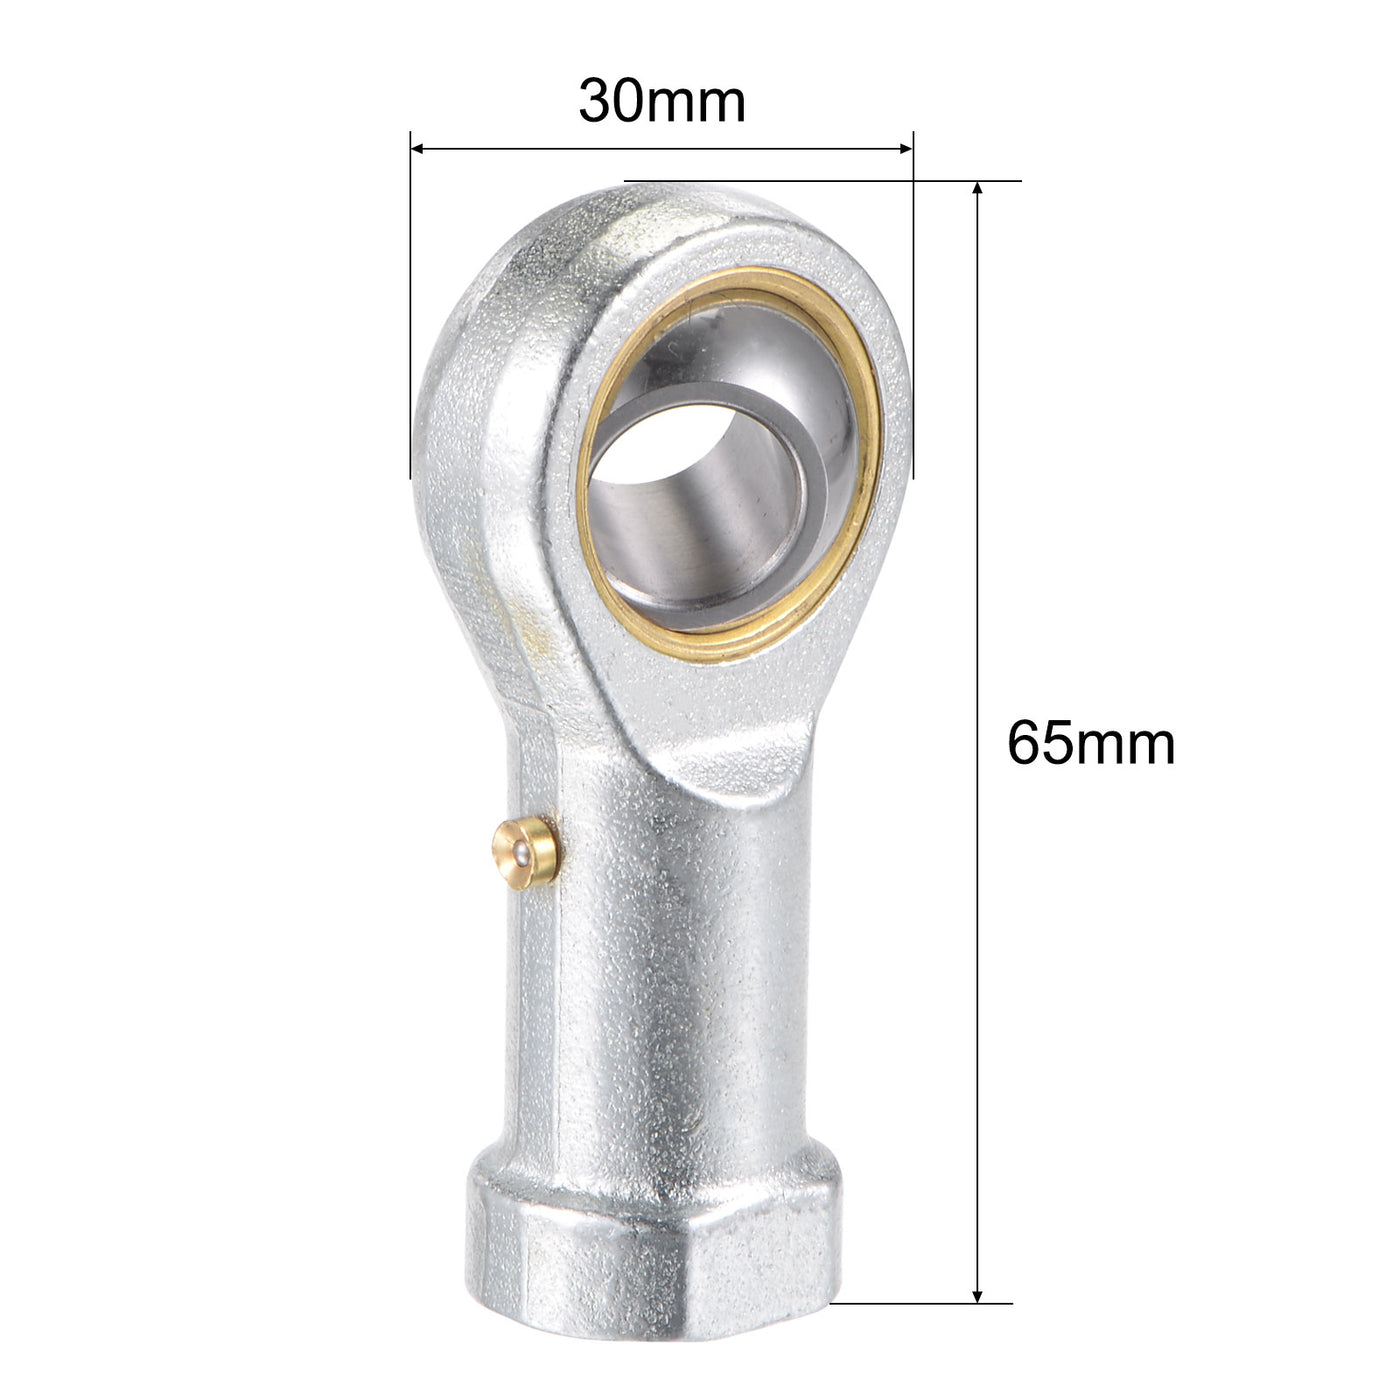 uxcell Uxcell PHS18 Rod End Bearing 18mm Bore Self-lubricated M18x1.5 Left Hand Female Thread